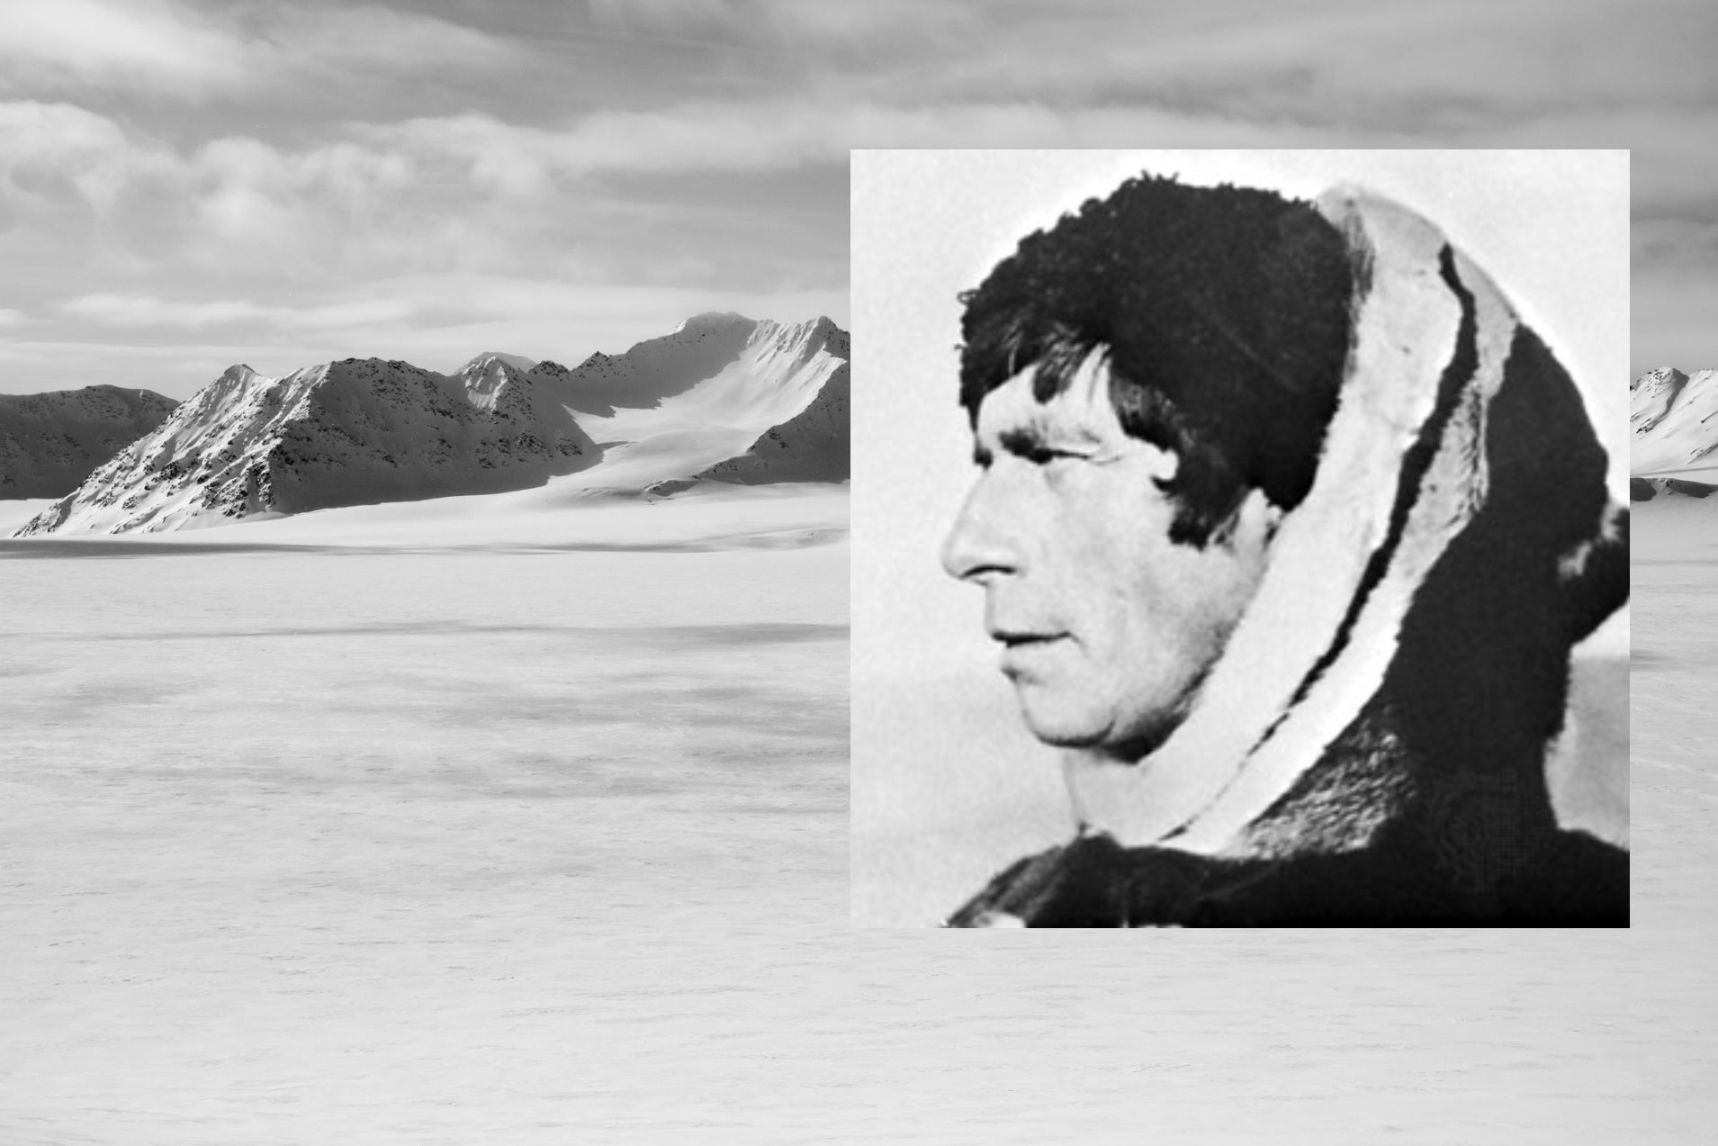 A photo of Knud Rasmussen, laid over a black and white photo of the Arctic wilderness.